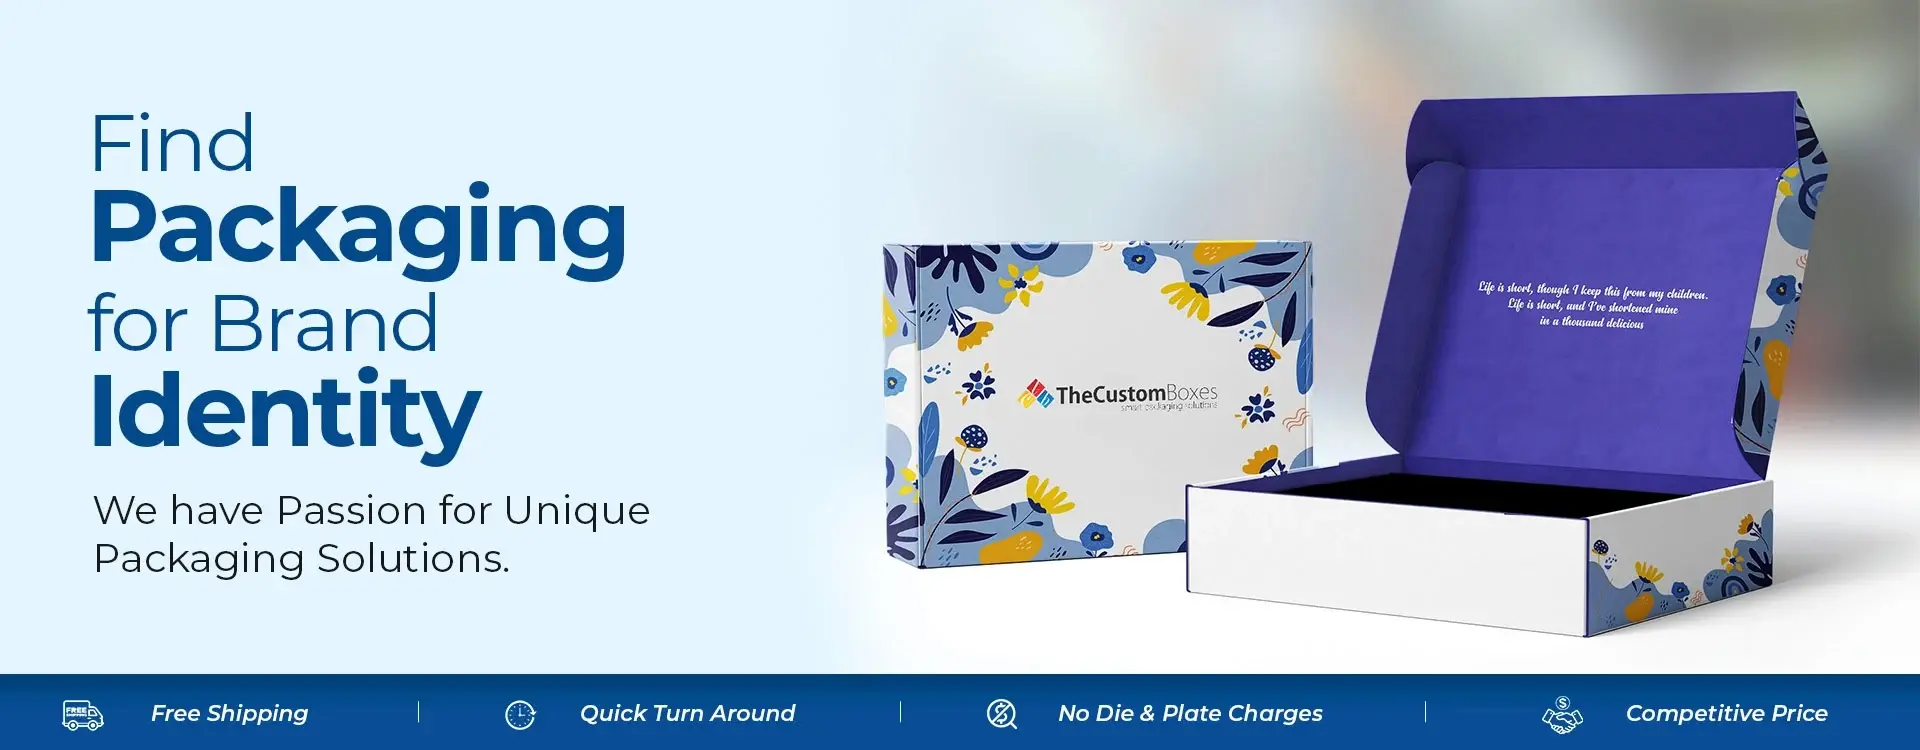 Find packaging for brand identity by thecustomboxes. Get volume discount upto 40% on your first order